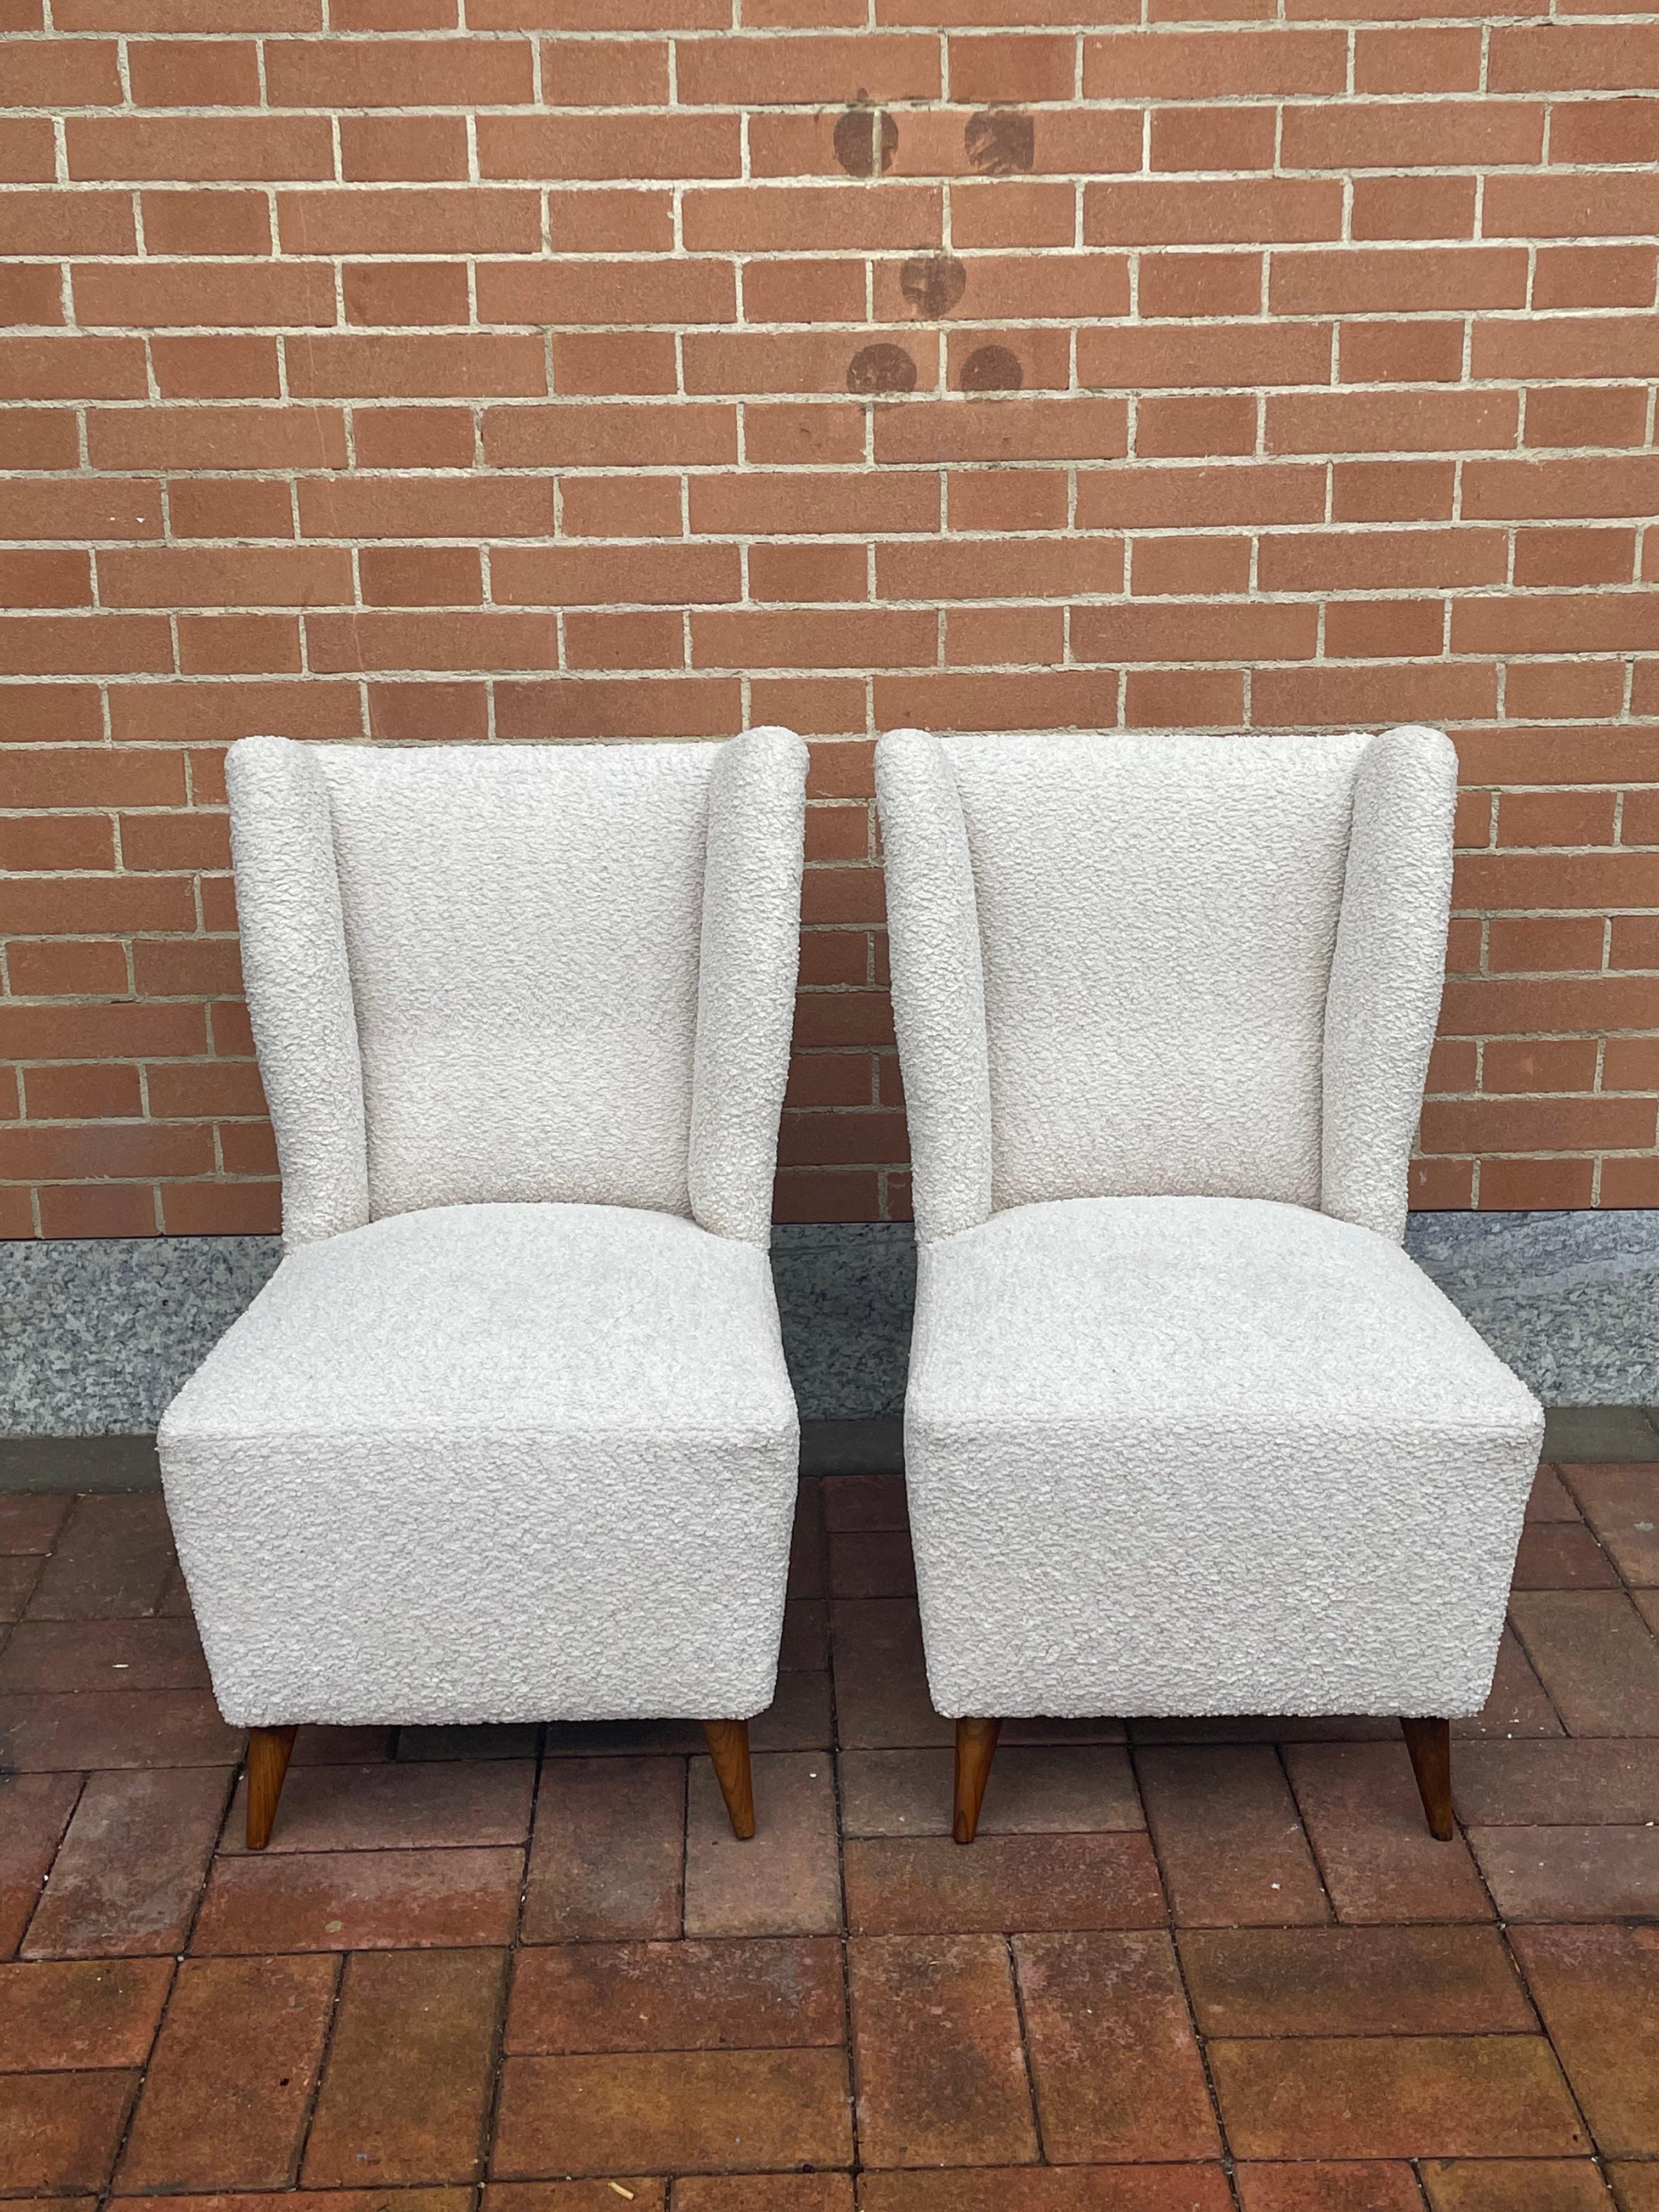 Pair of 1950s slipper chairs with new white bouclé upholstery.
Structure and foot in wood.
The armchairs, although small in size, offer great seating comfort.
Perfect in a small hall or in a relaxing corner of the house.